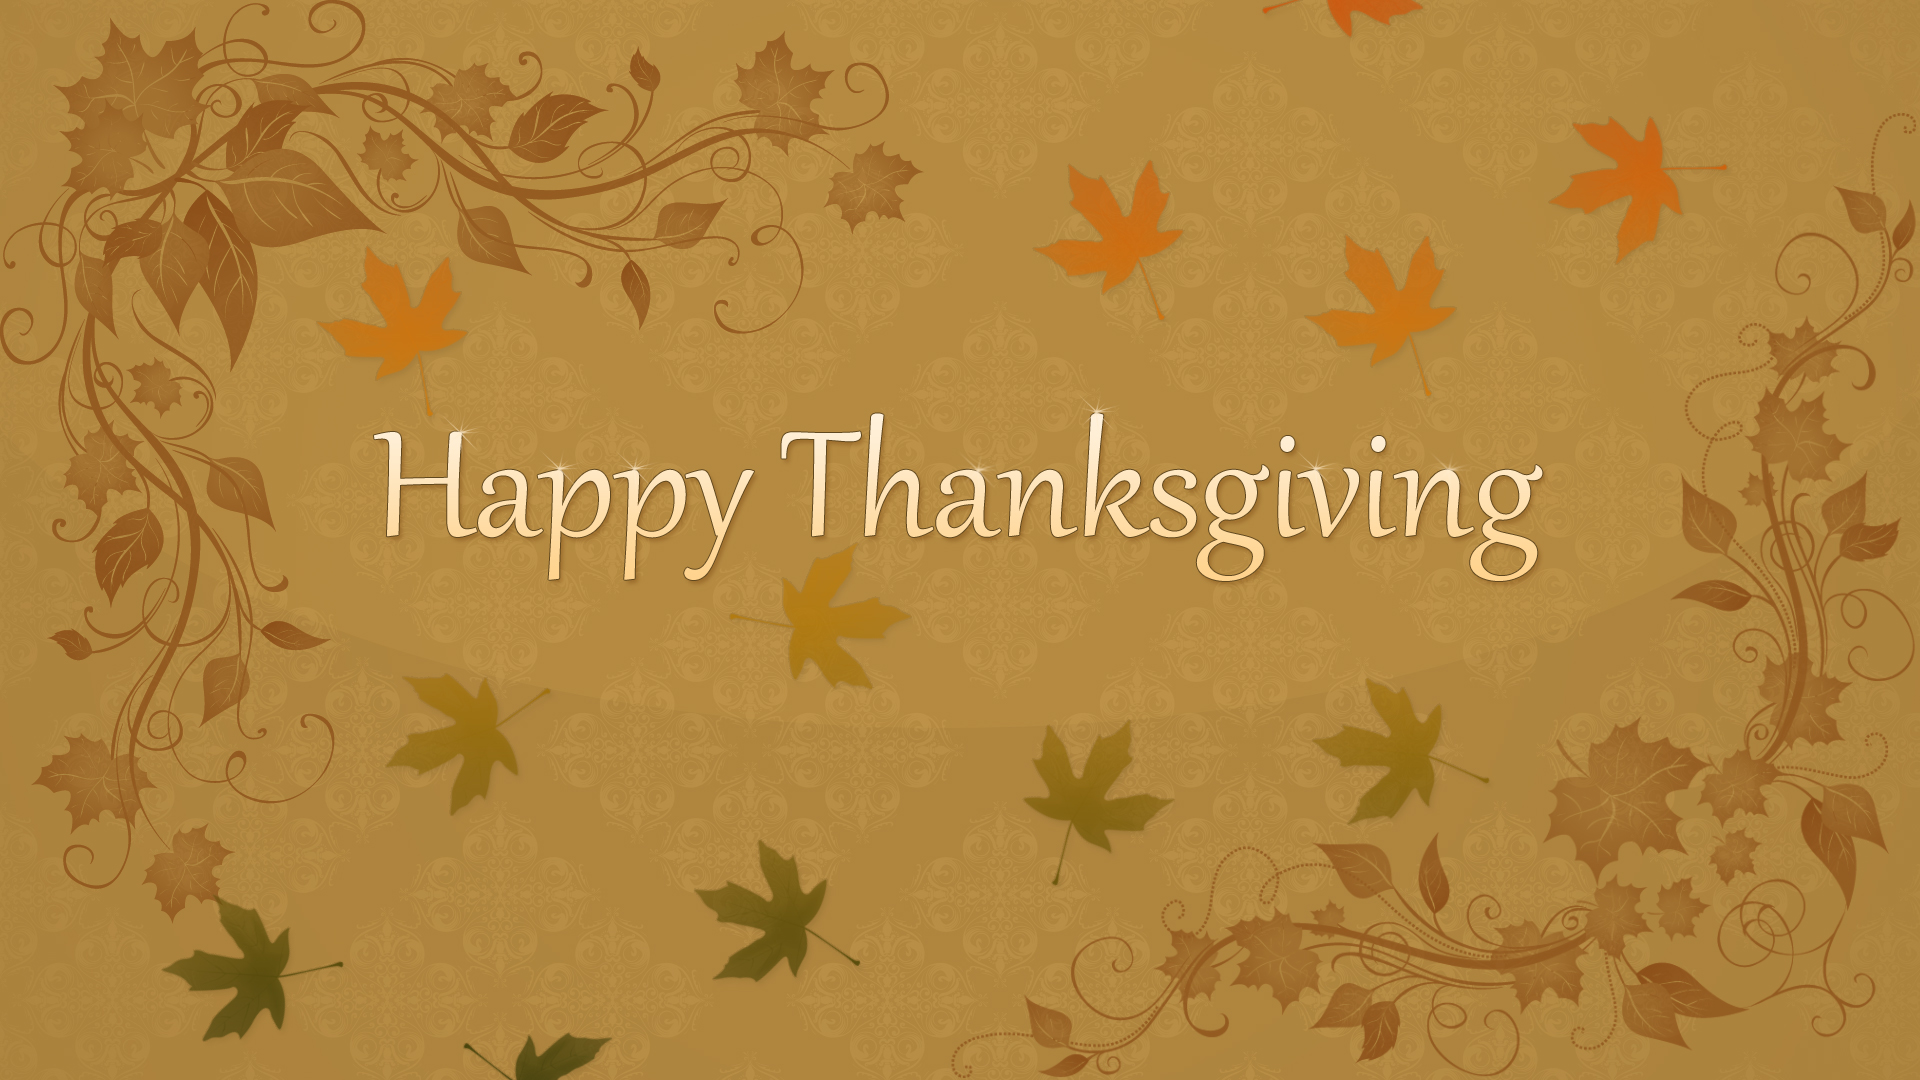 Happy Thanksgiving Background HD Image Amp Pictures Becuo